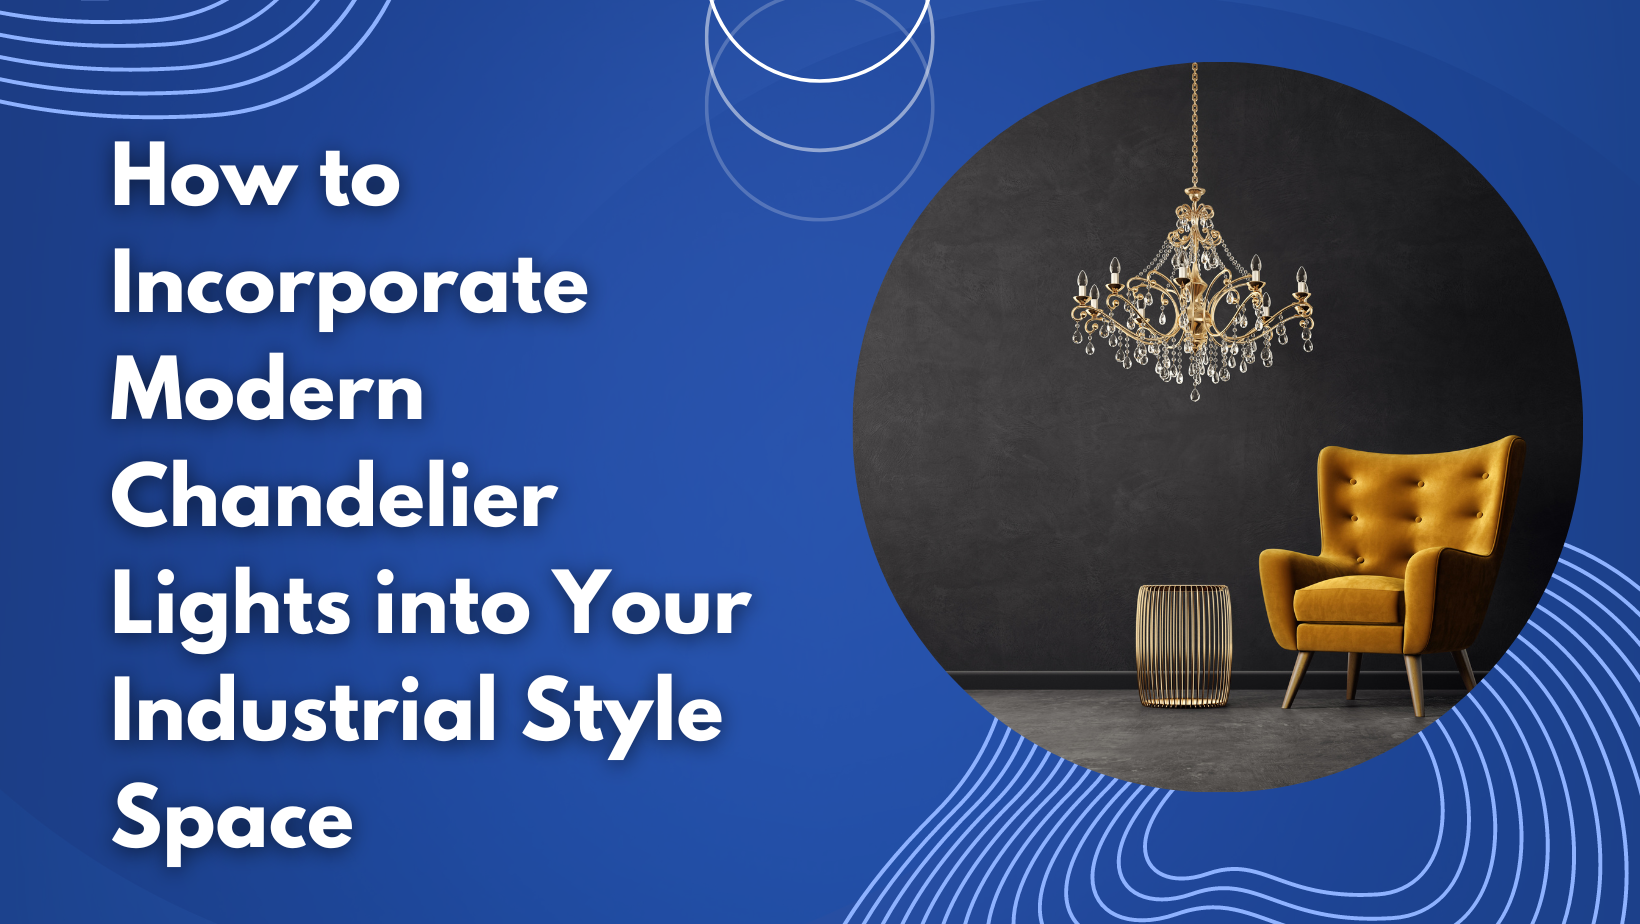 How to Incorporate Modern Chandelier Lights into Your Industrial Style Space